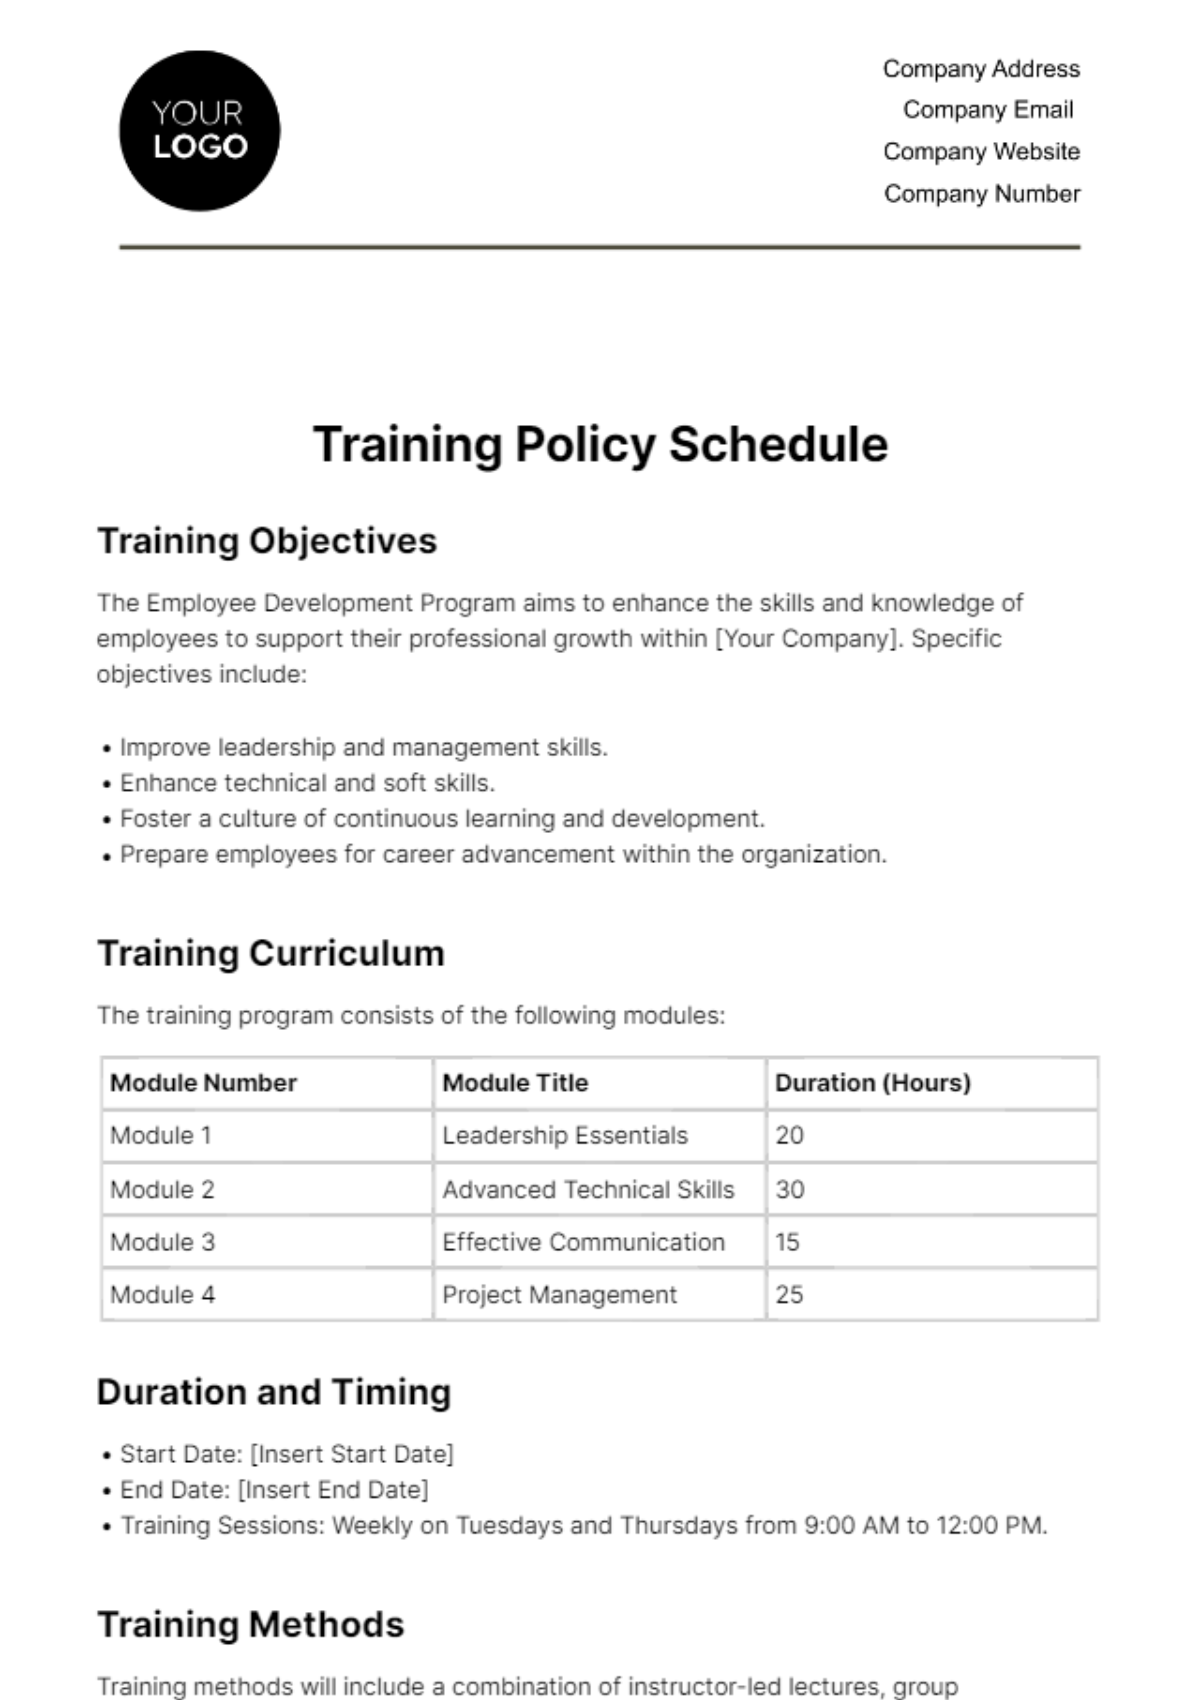 Training Policy Schedule HR Template